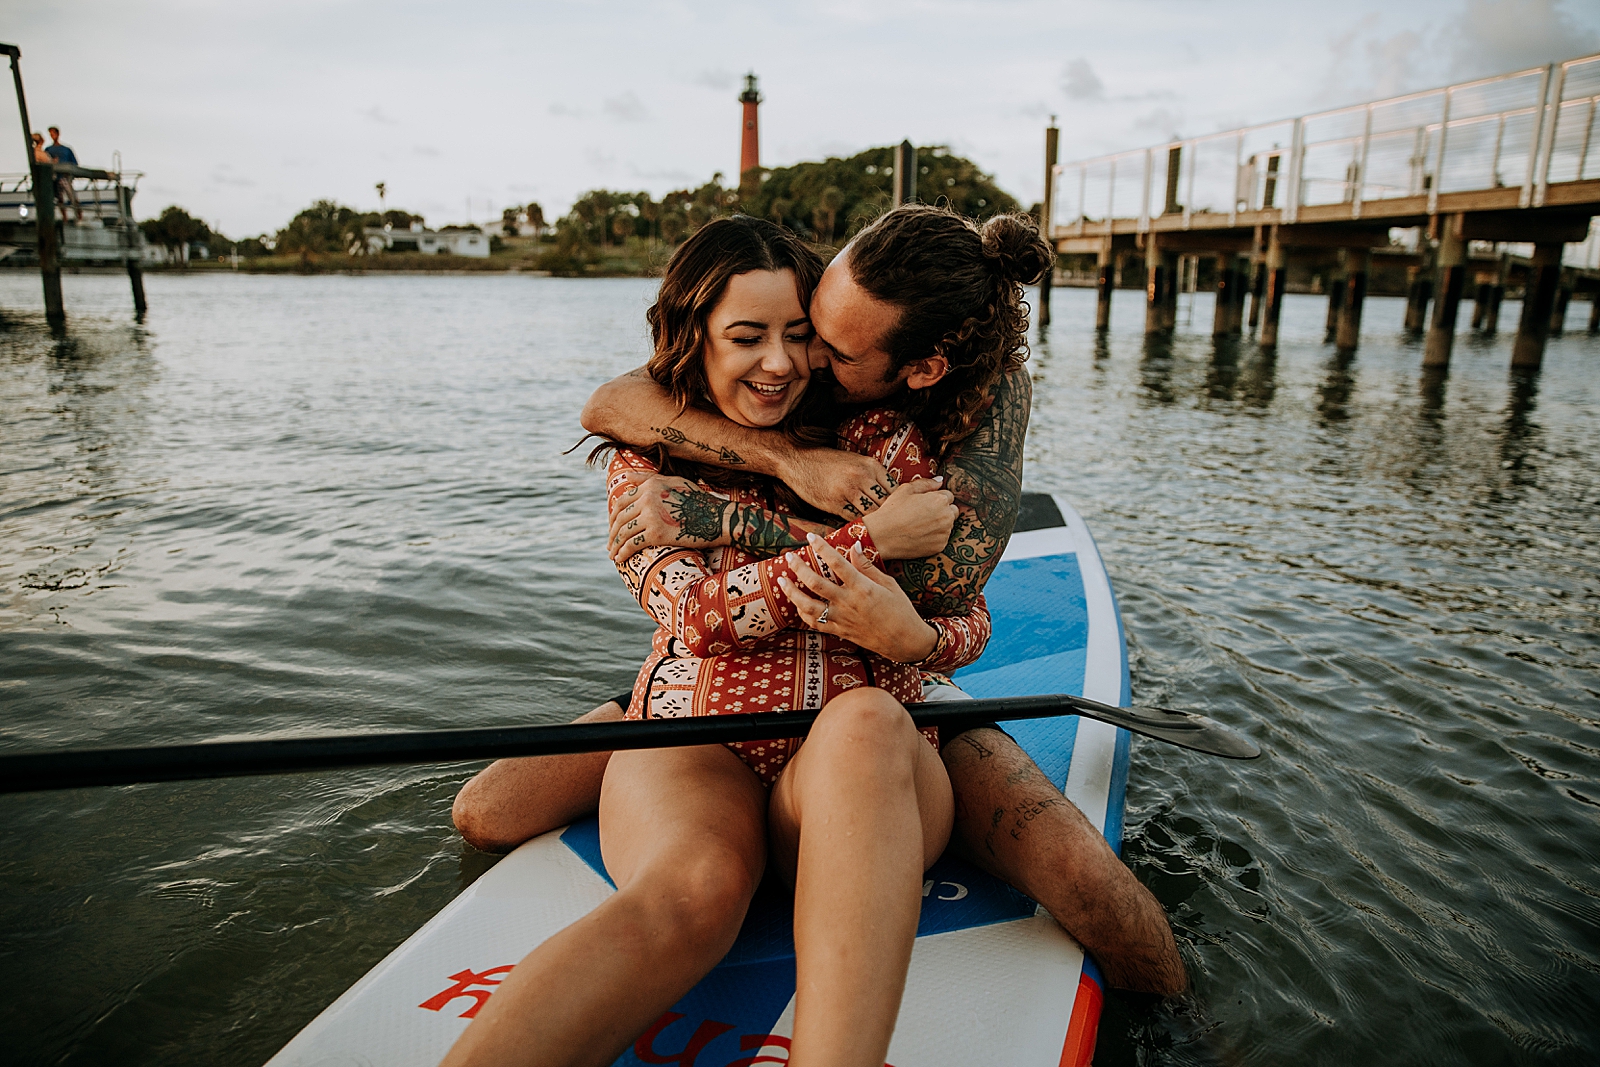 Man wrapping arms around woman on paddle board on calm water Dubois Park Engagement Photography captured by South Florida Family Photographer Maggie Alvarez Photography